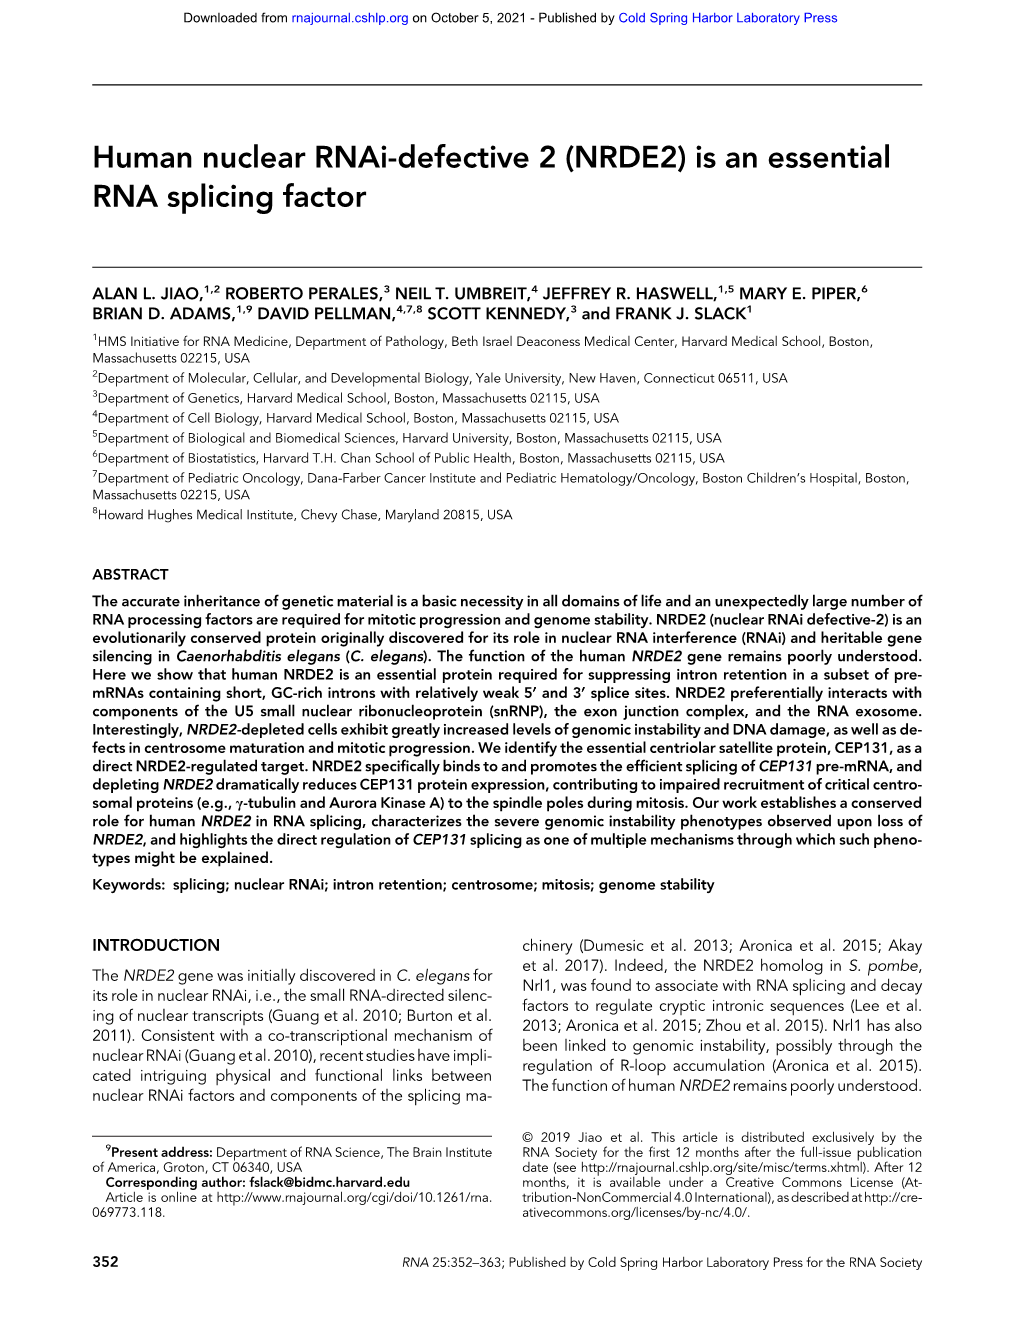 Human Nuclear Rnai-Defective 2 (NRDE2) Is an Essential RNA Splicing Factor